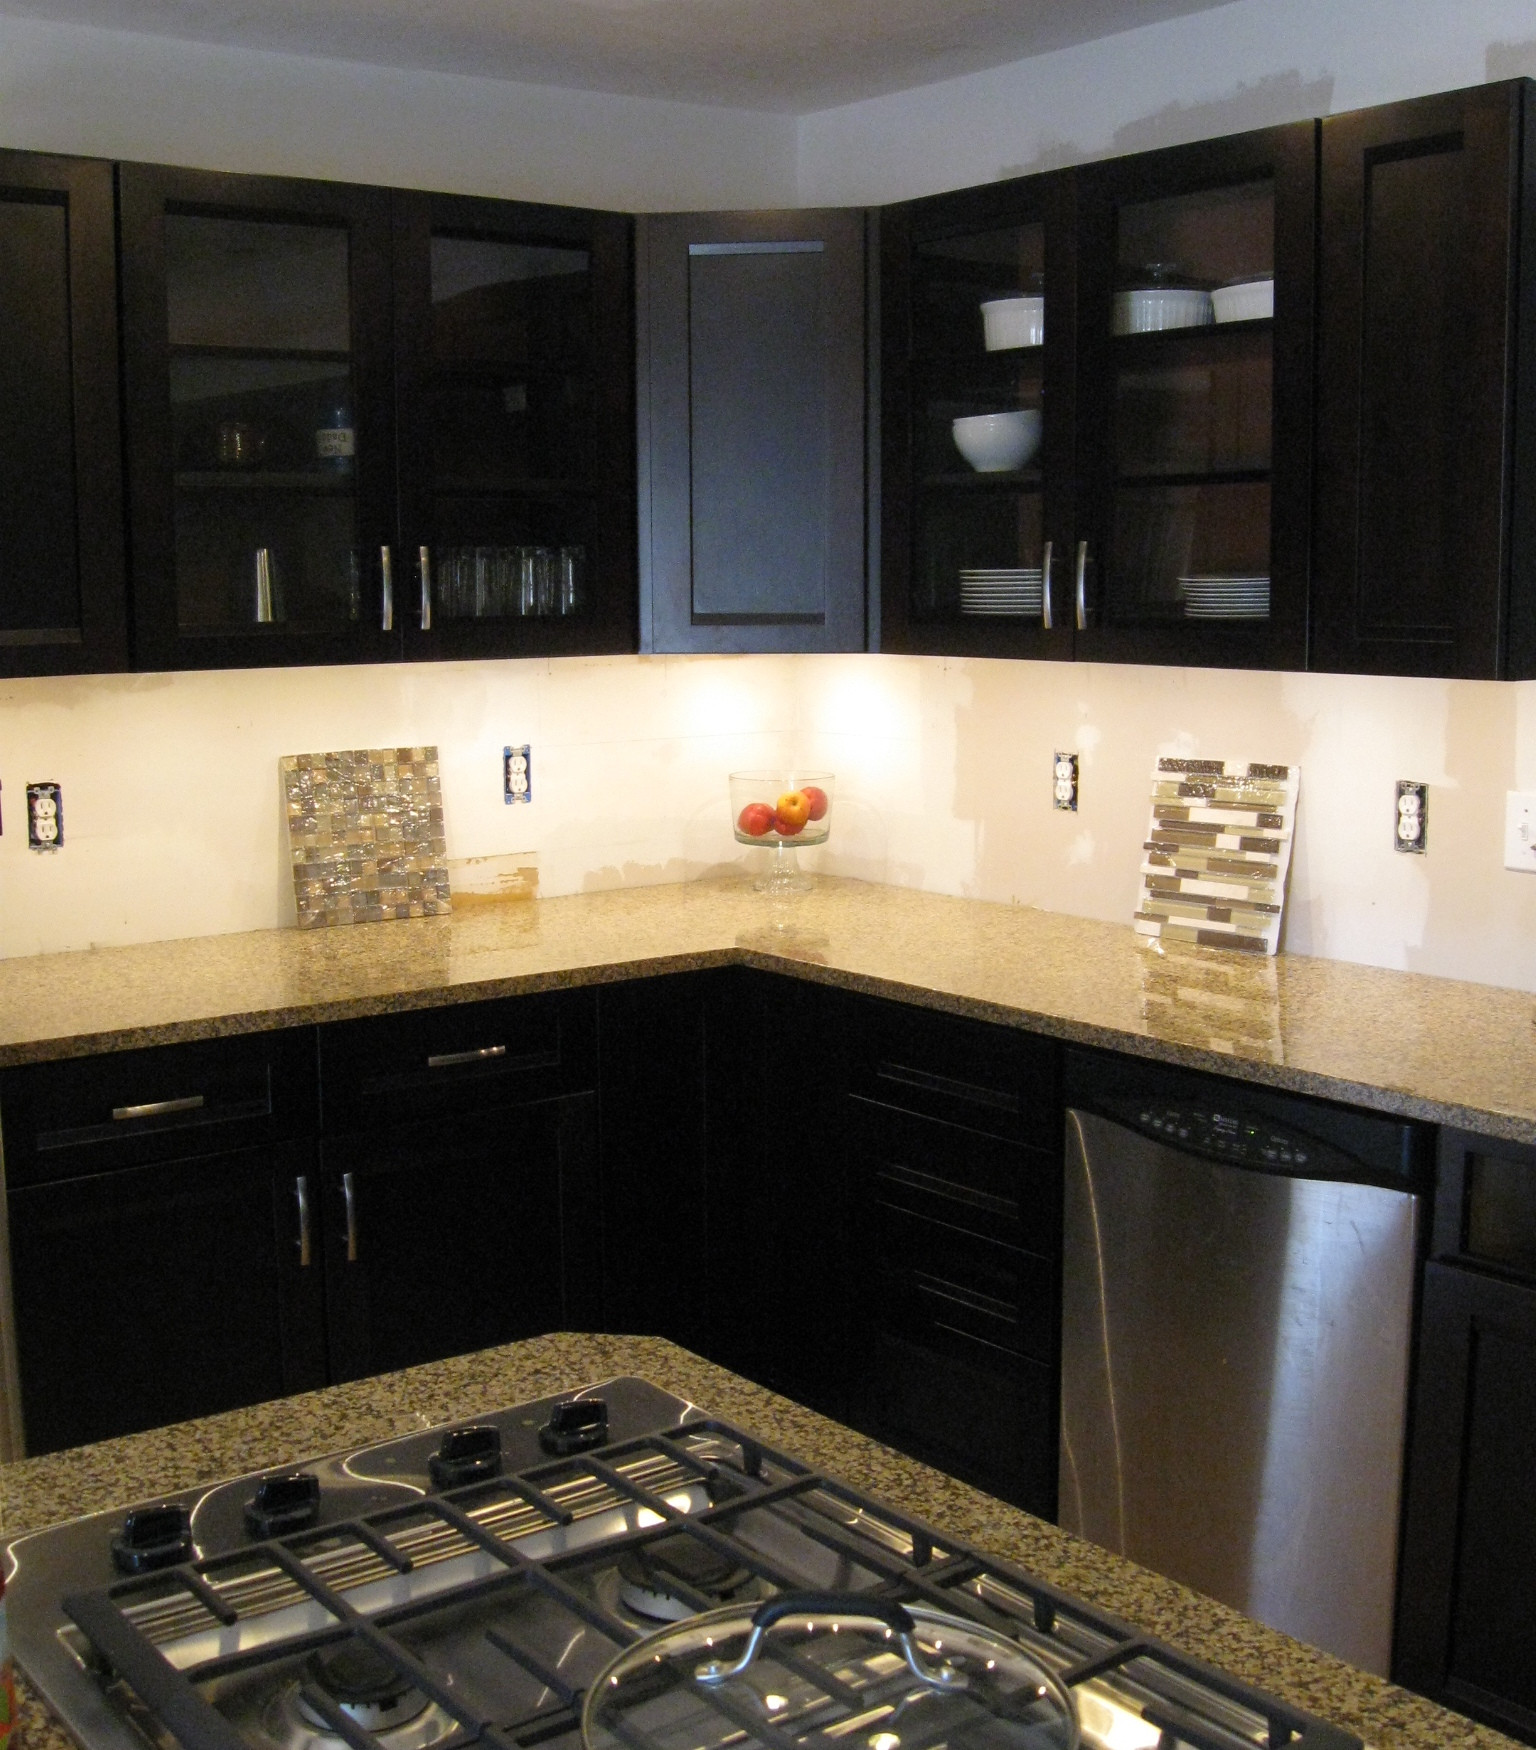 Kitchen Cabinets Led Lighting
 High Power LED Under Cabinet Lighting DIY Great Looking